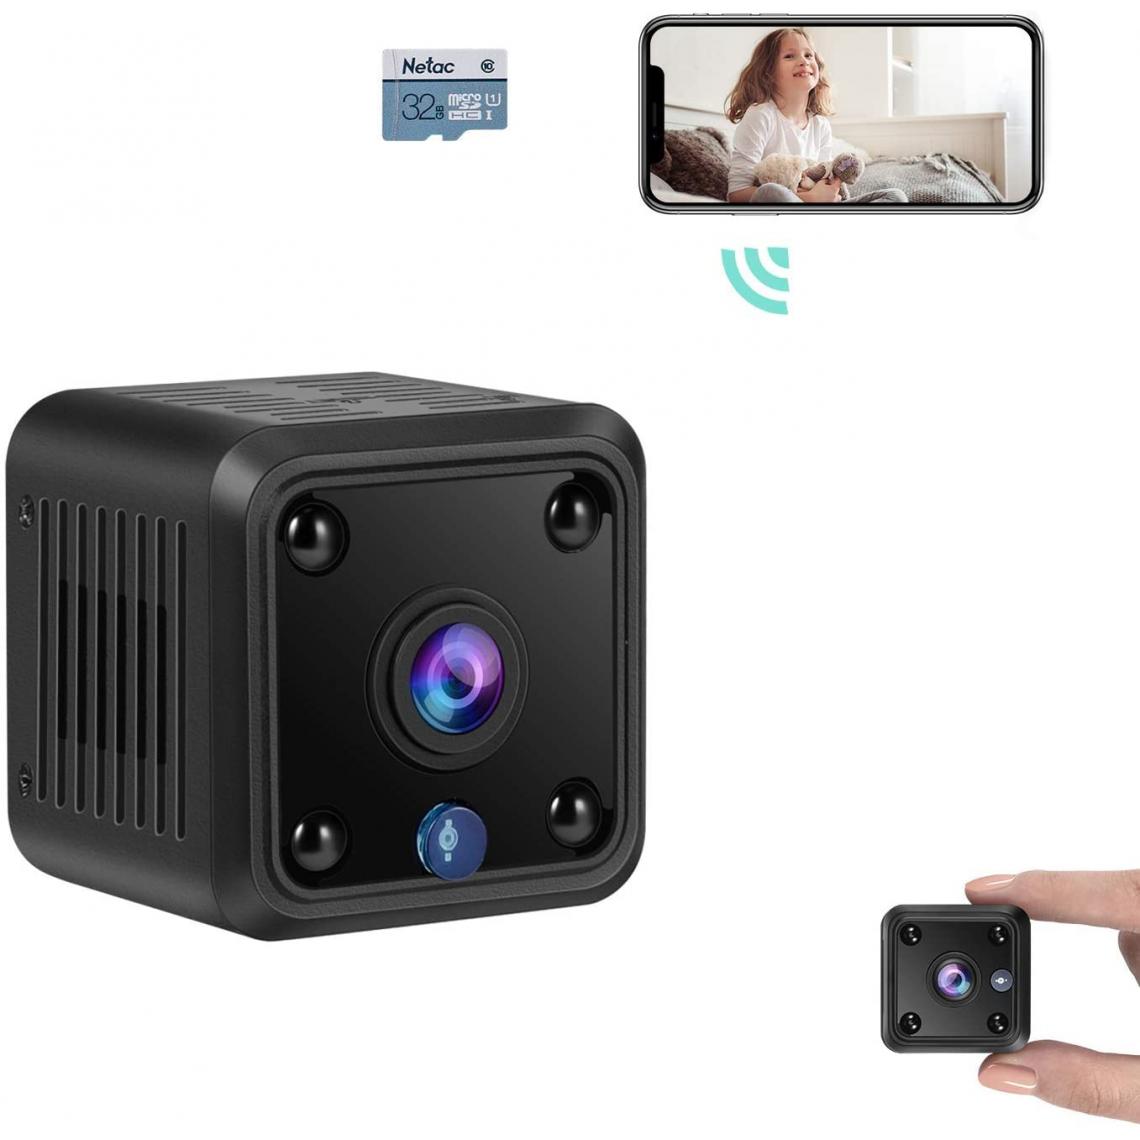 marque generique - Mini Spy Camera wifi Wireless Hidden camera hm206 1080p HD MINI Home security camera with 32G Storage Card night vision Motion Detection full Mini baby - sitter Camera for inside and outside the room - Caméra de surveillance connectée